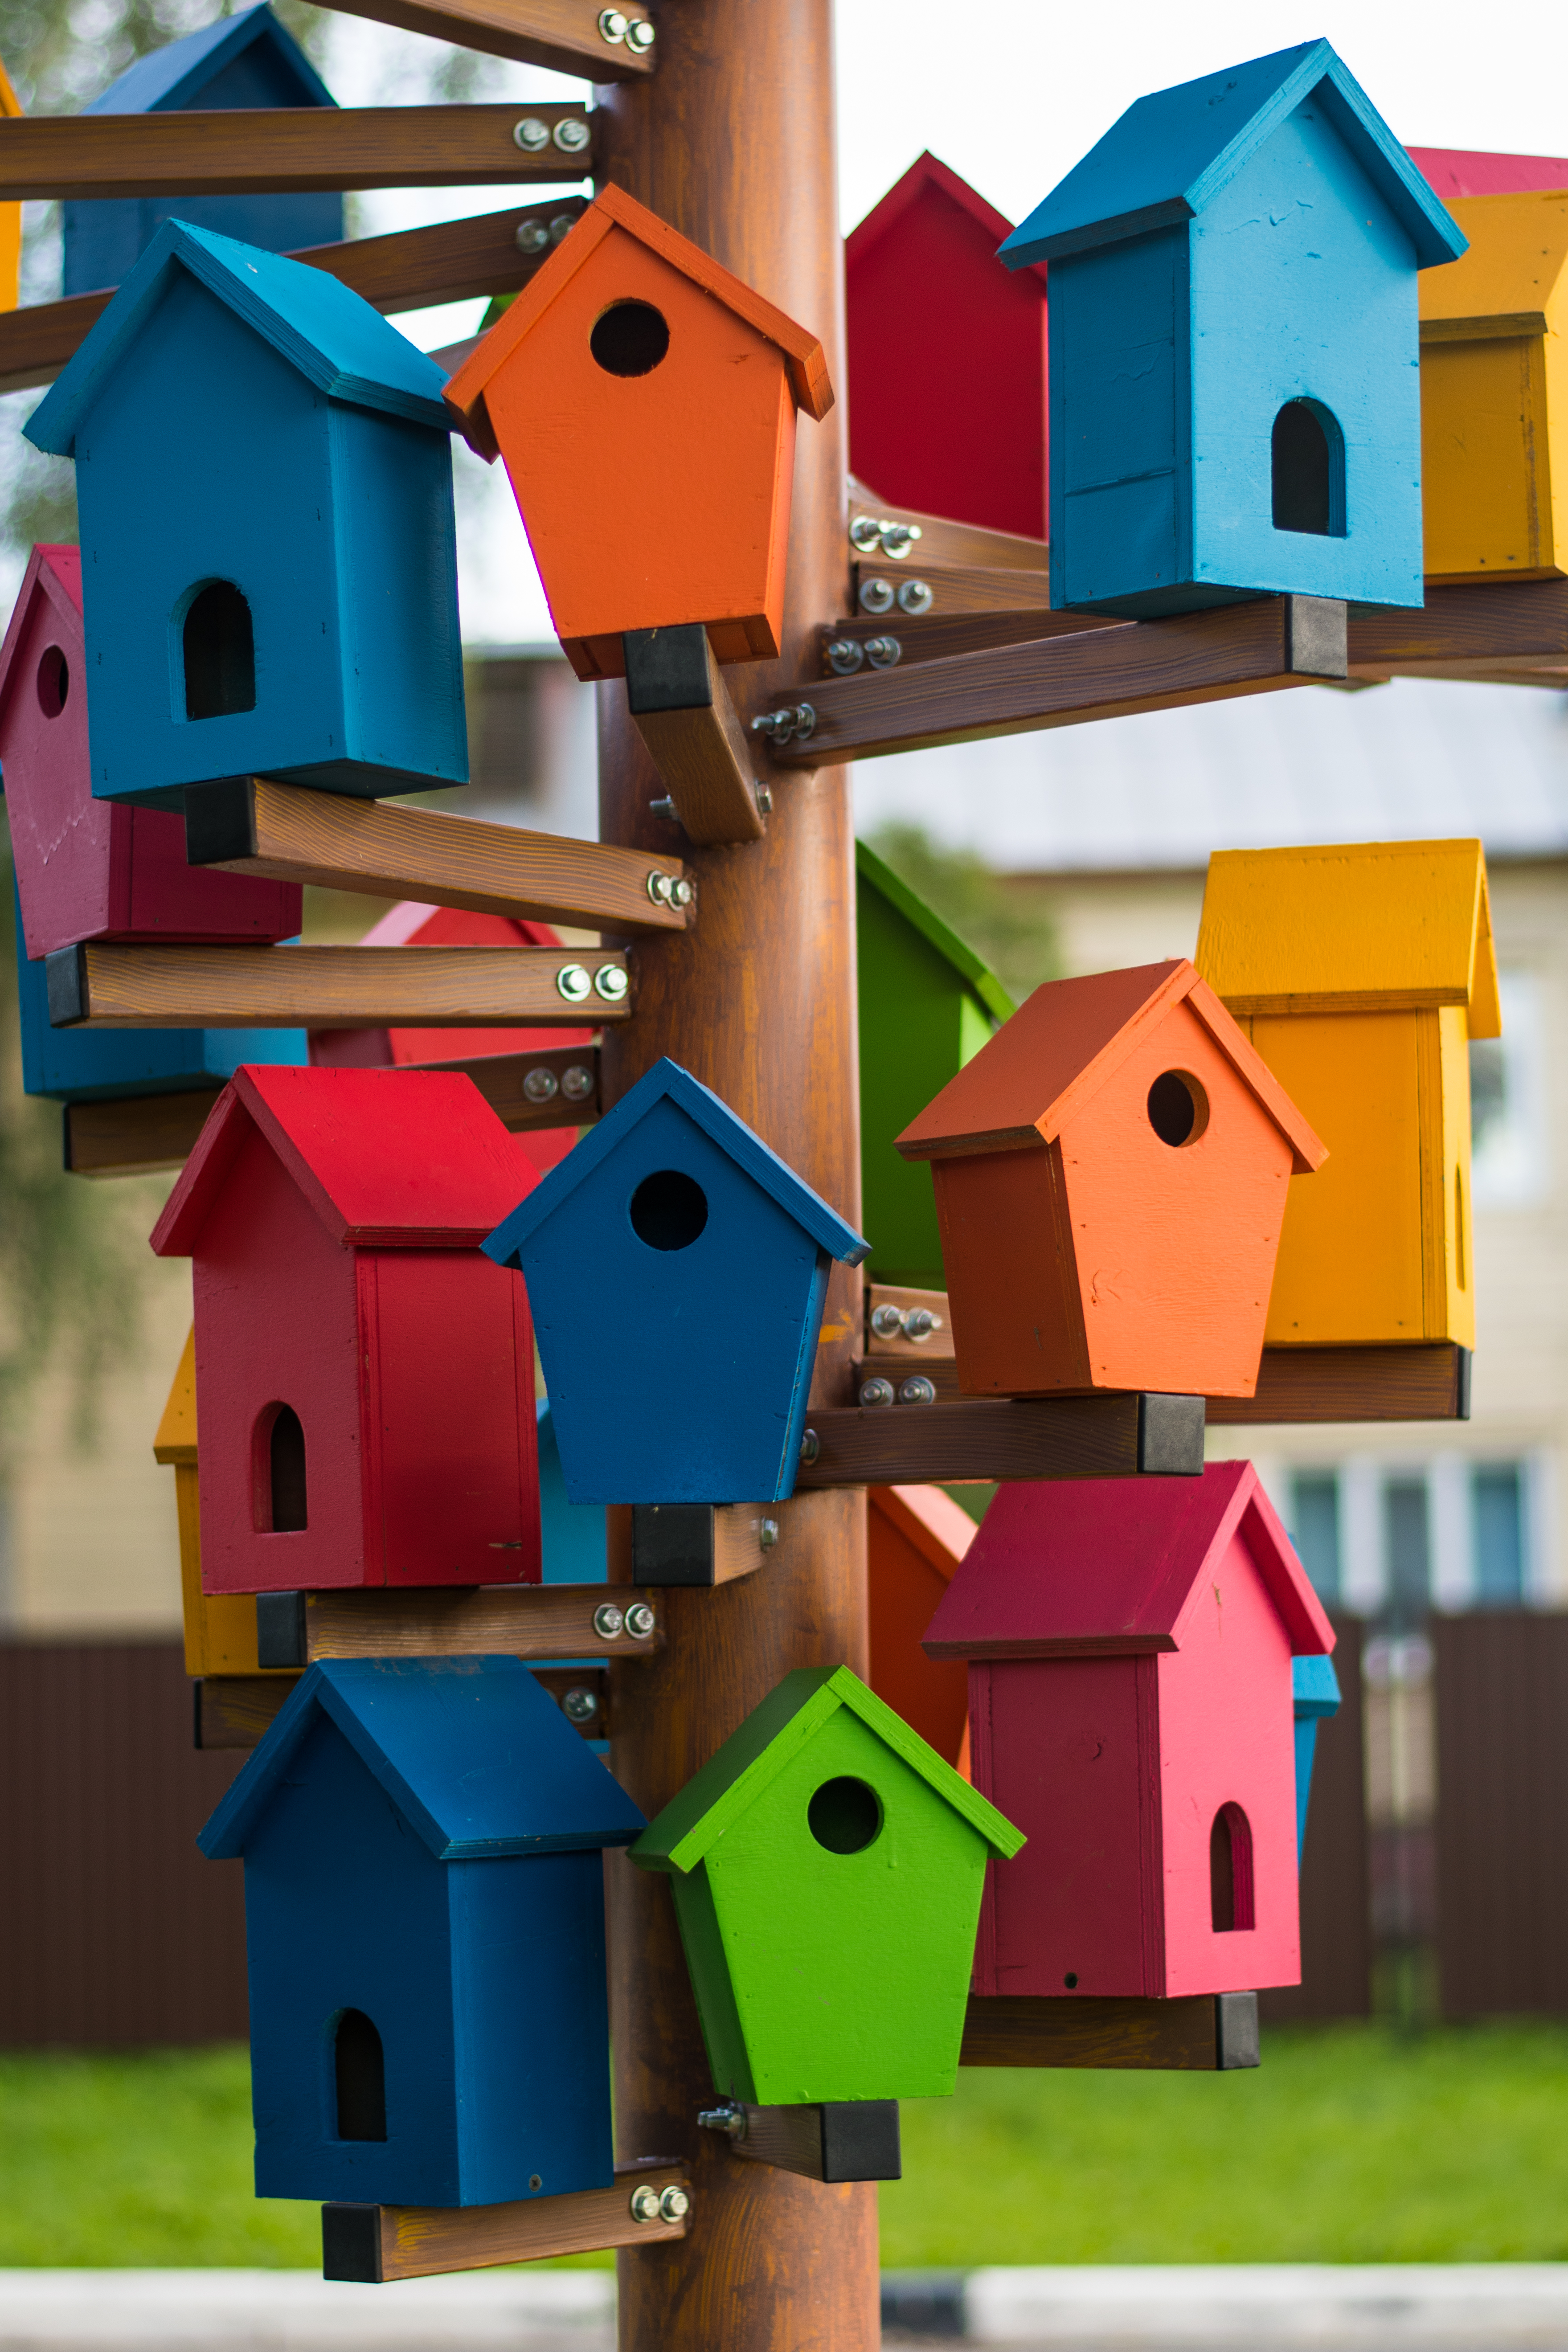 Assortment of colorful painted birdhouses.